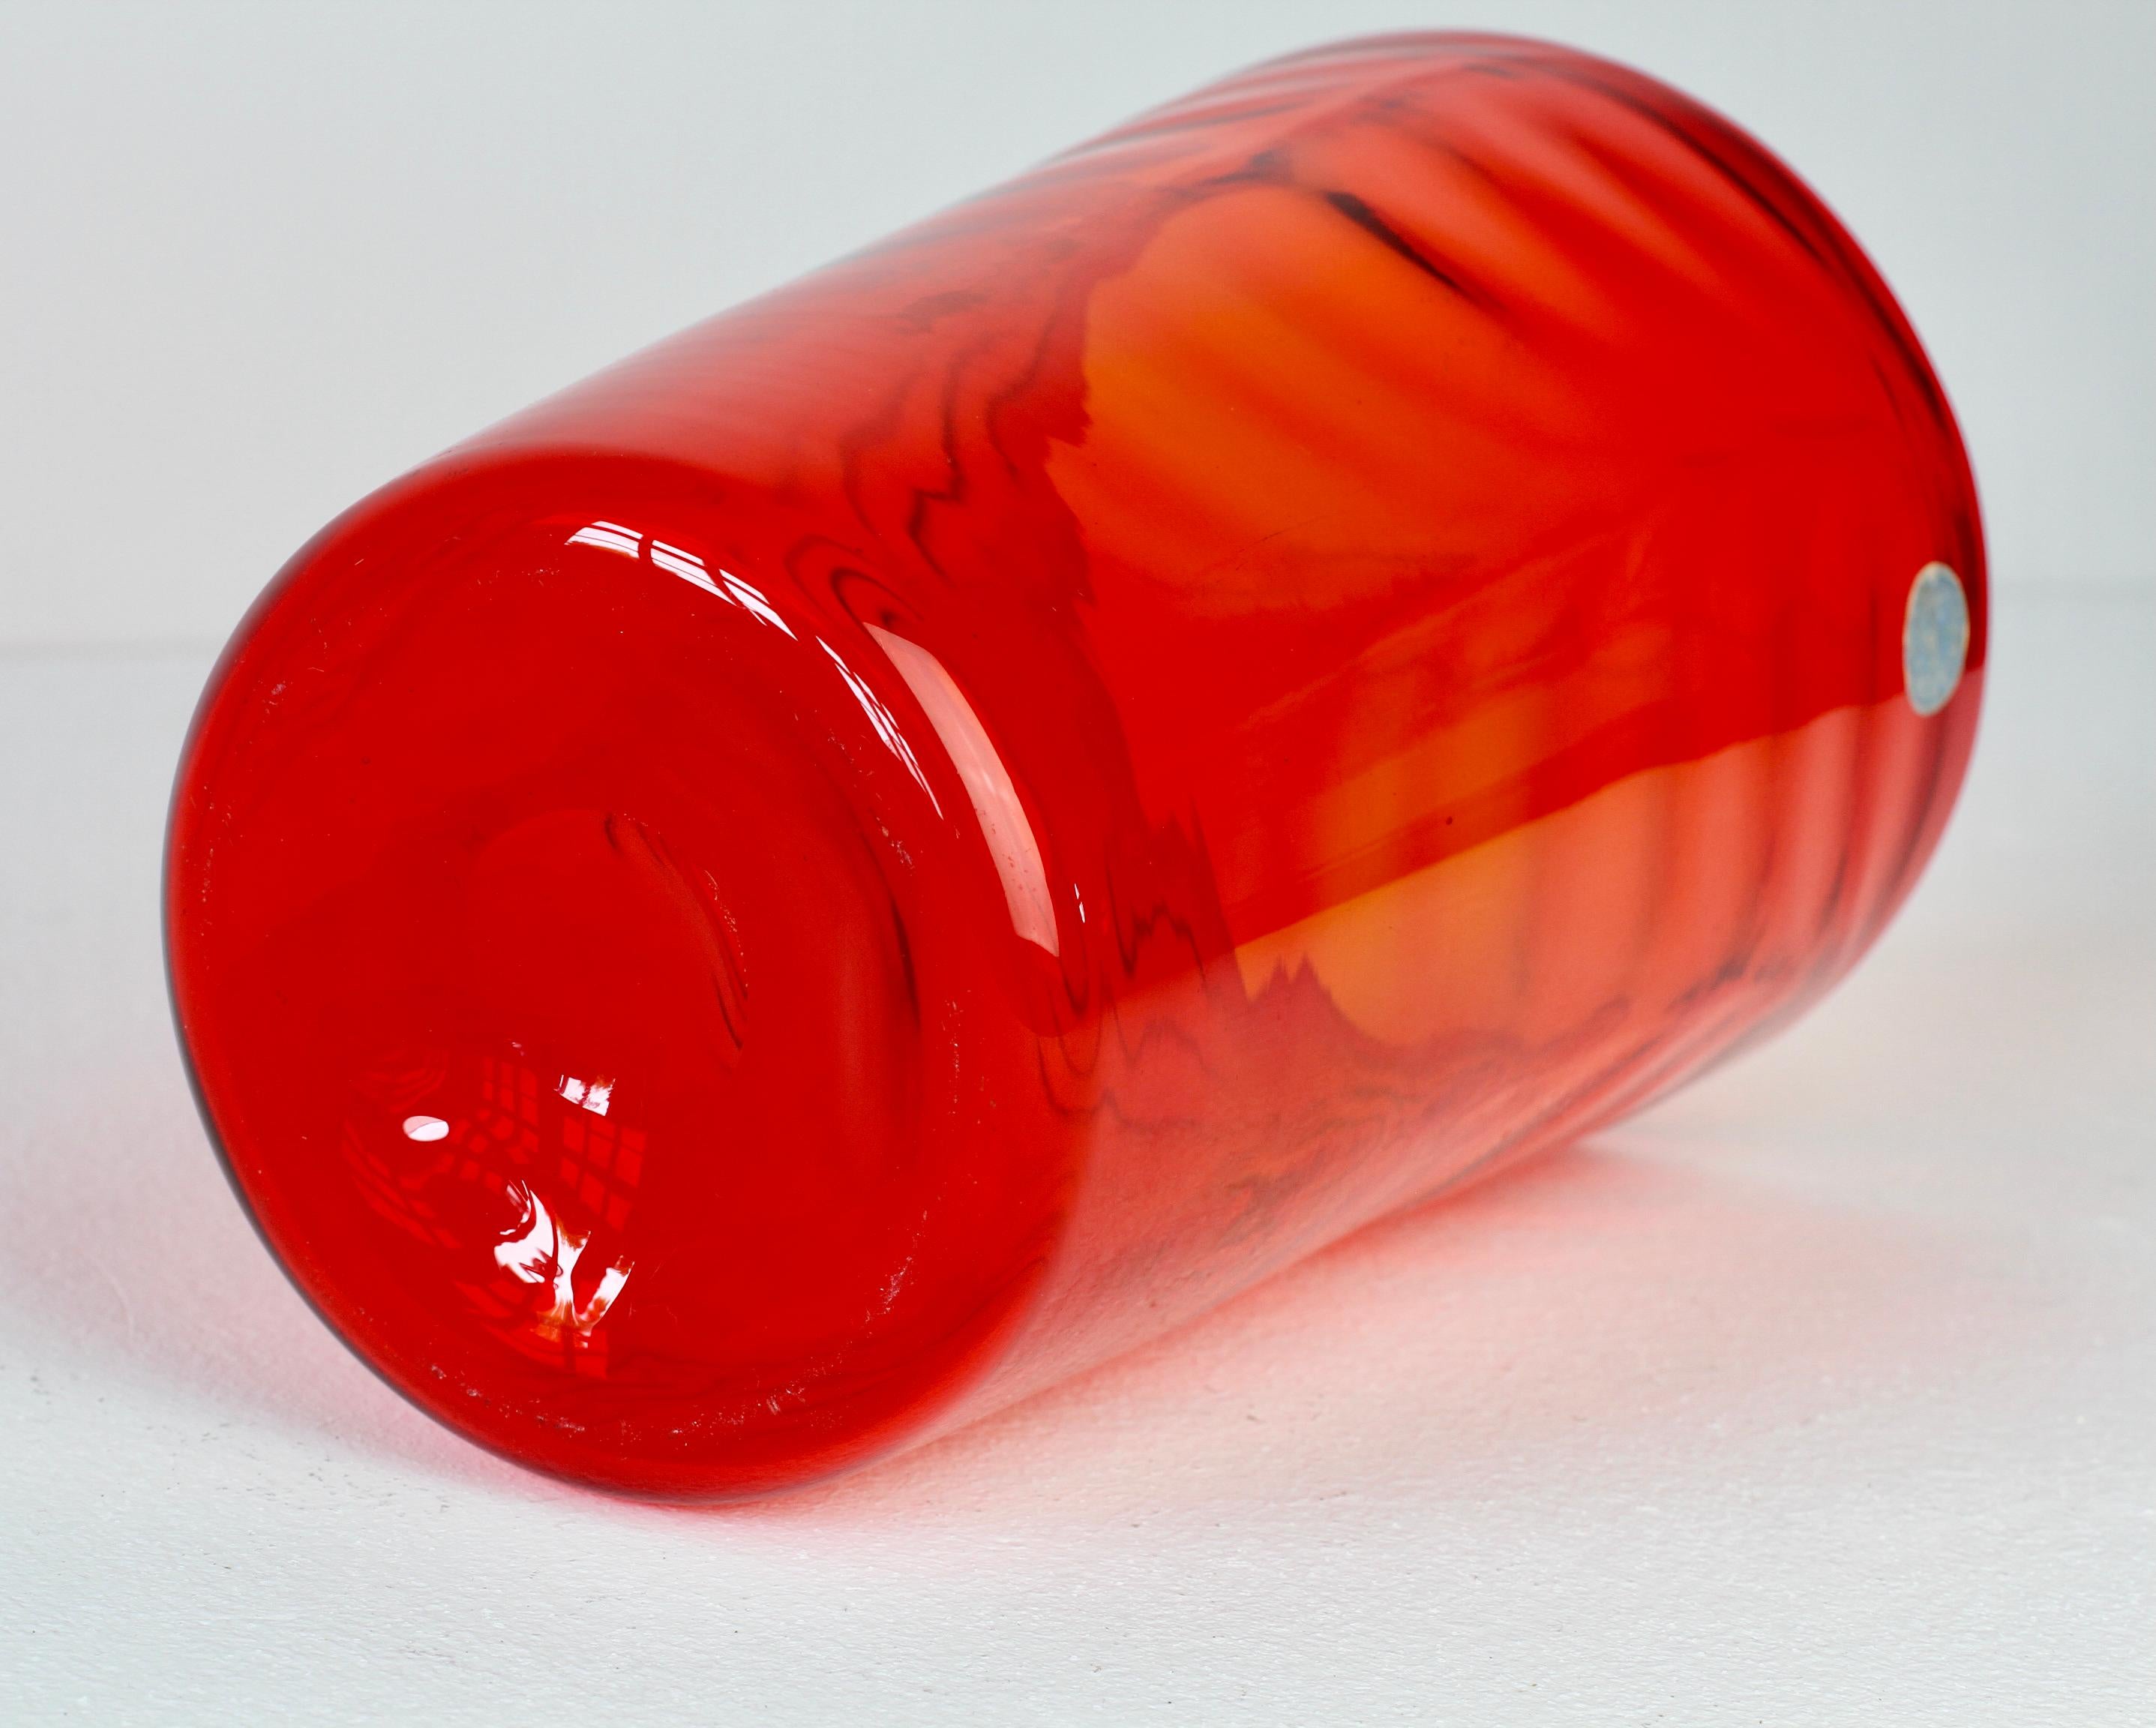 Whitefriars Vintage Vibrant Red Glass Vase by Barnaby Marriott Powel, C. 1940 For Sale 9